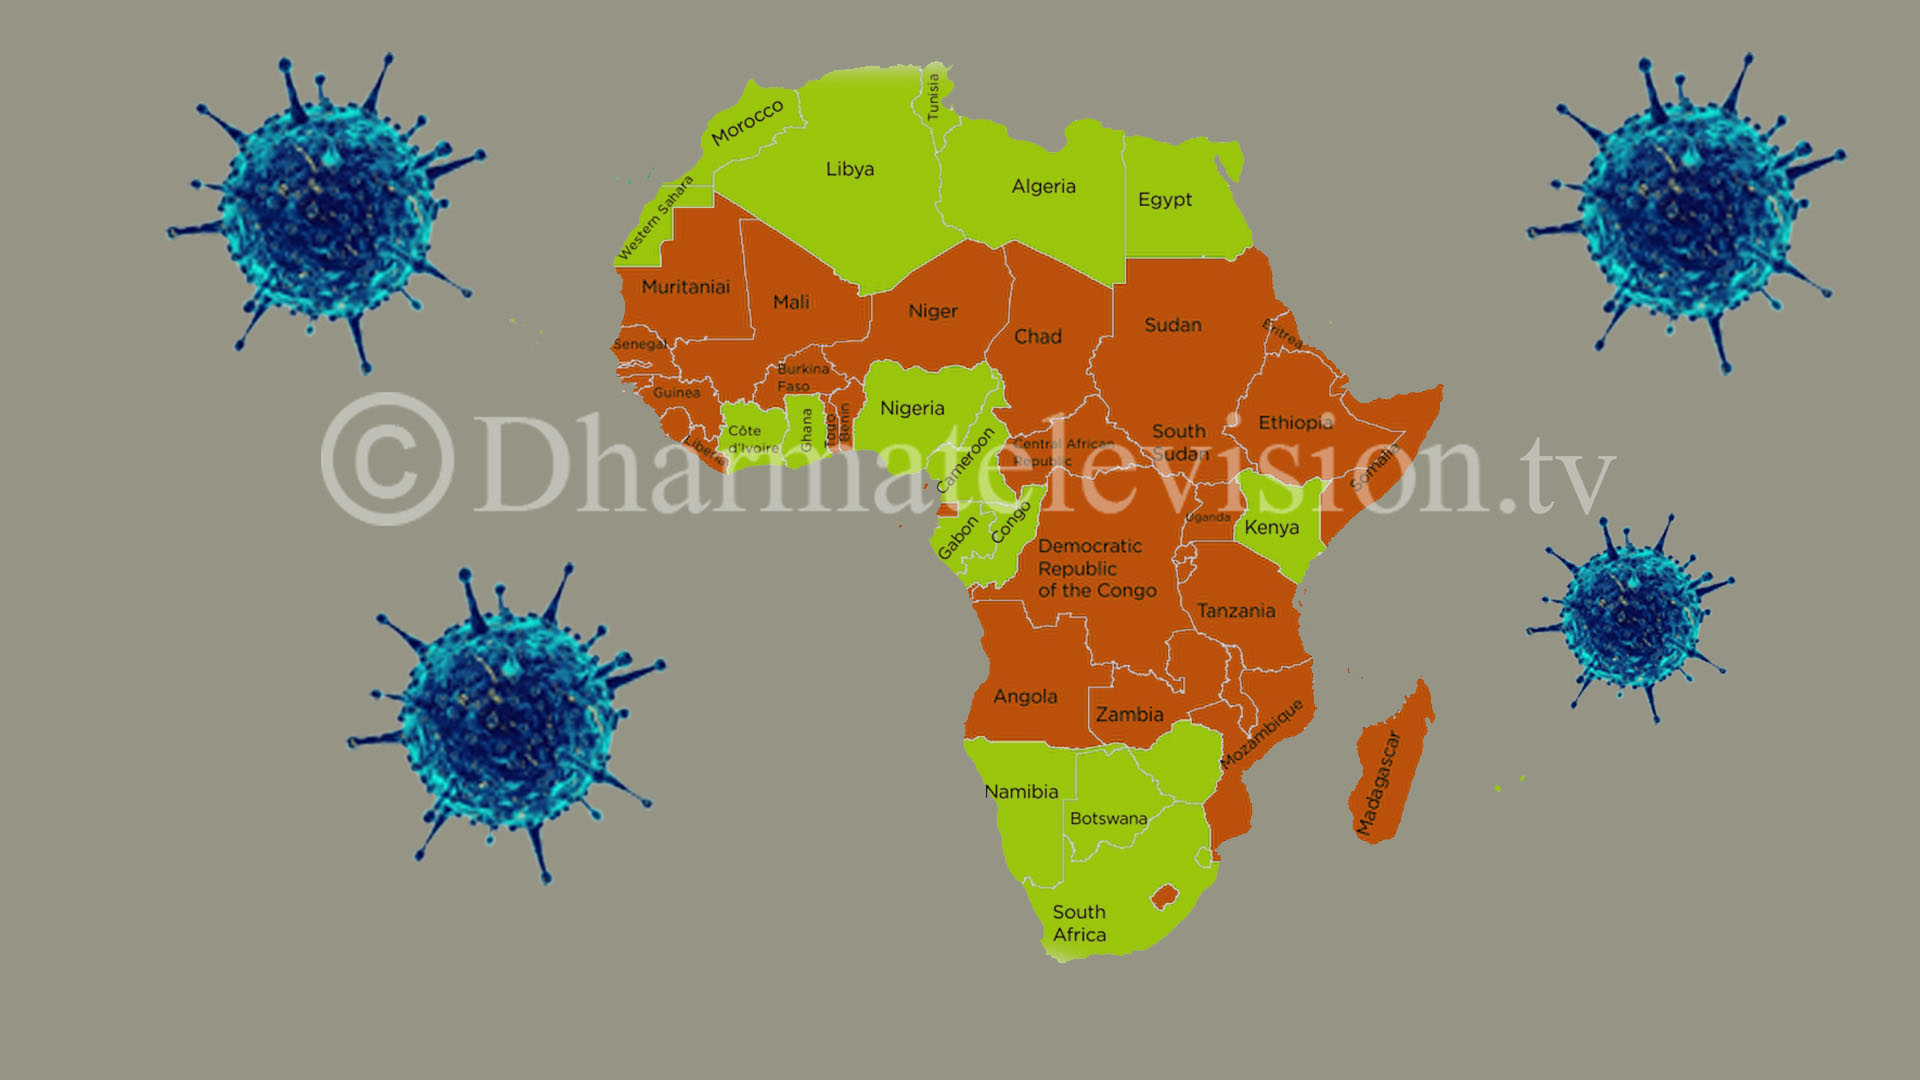 Africa is the less affected by Covid-19